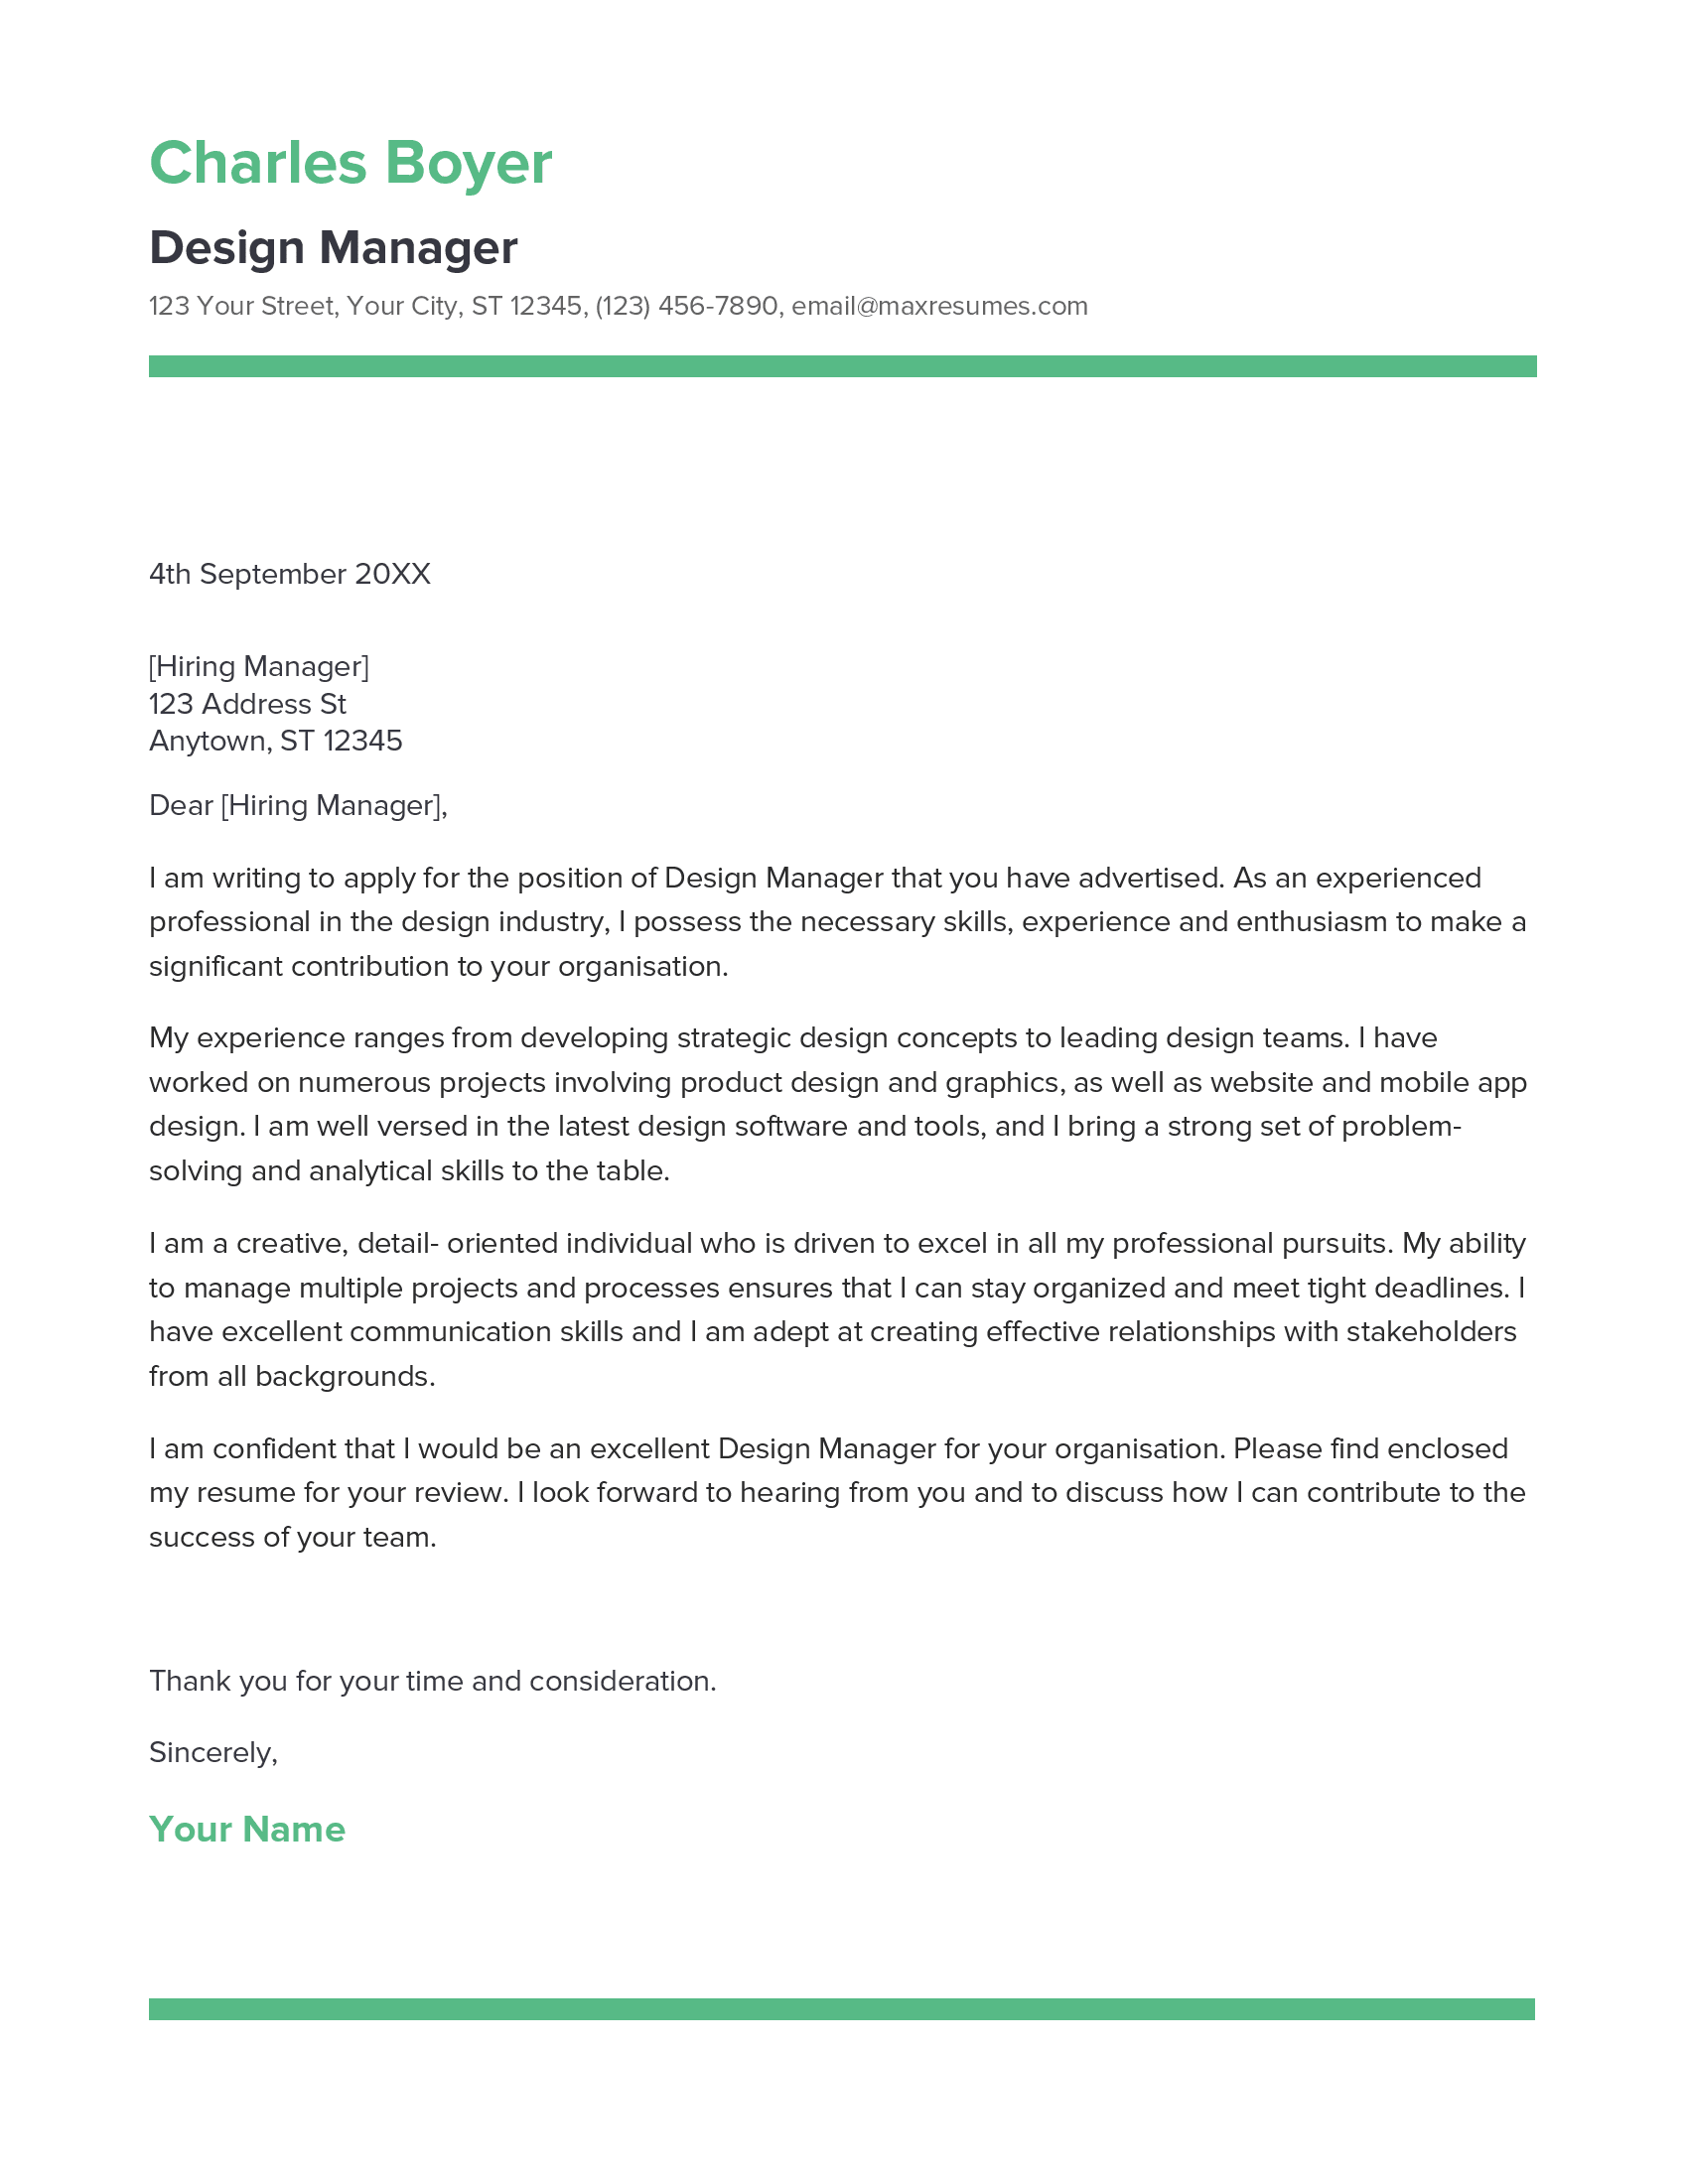 Design Manager Cover Letter Example